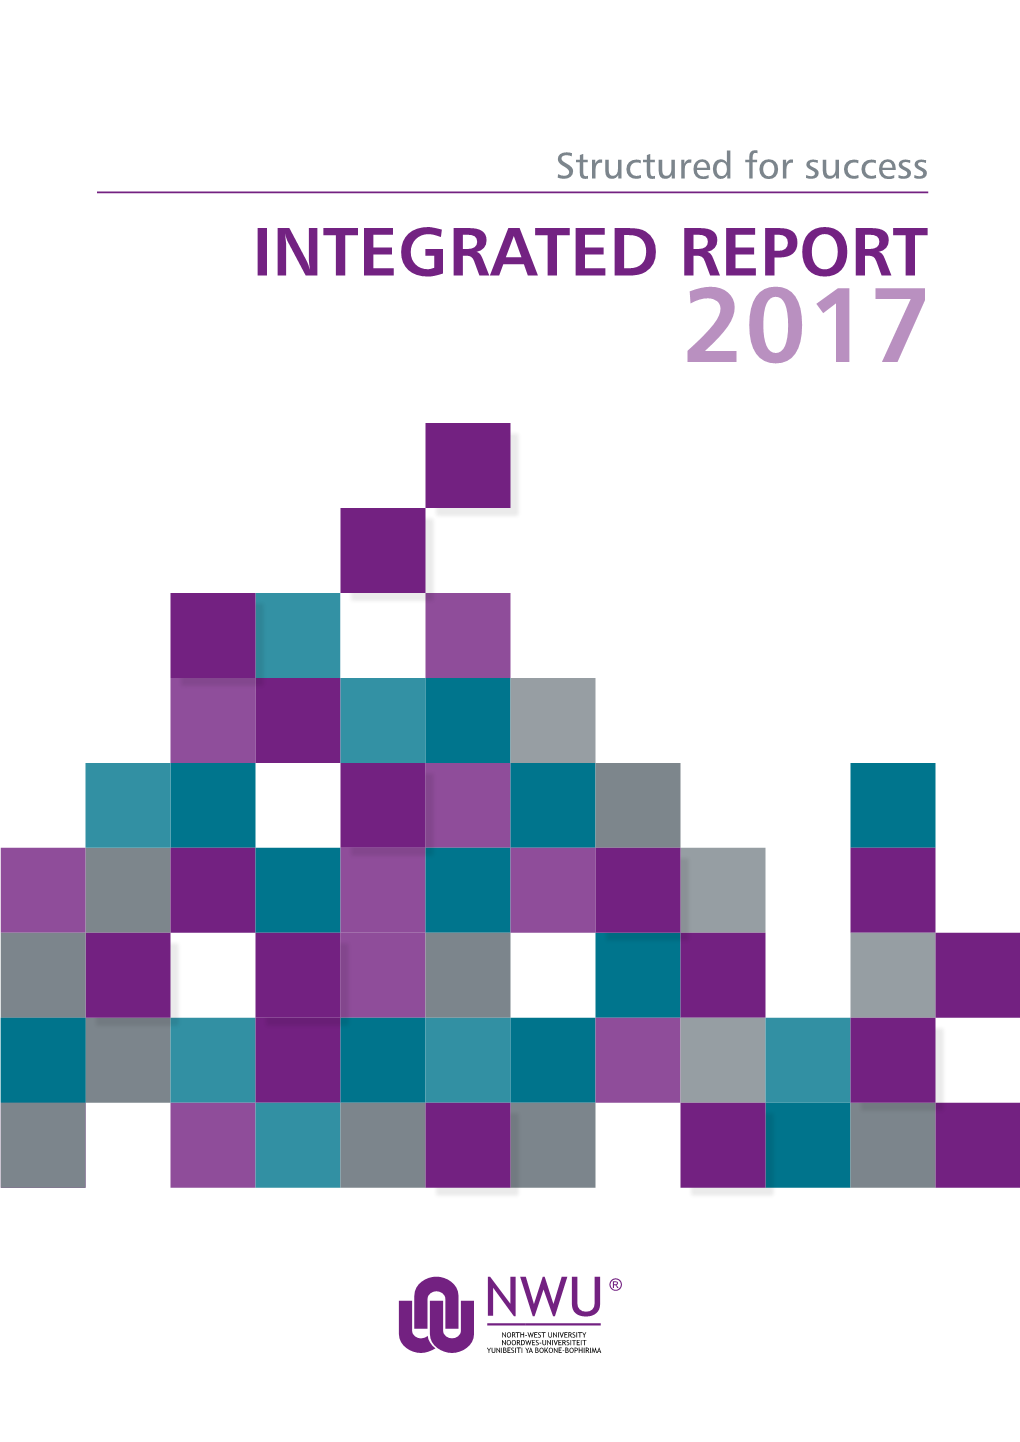 Integrated Report for 2017